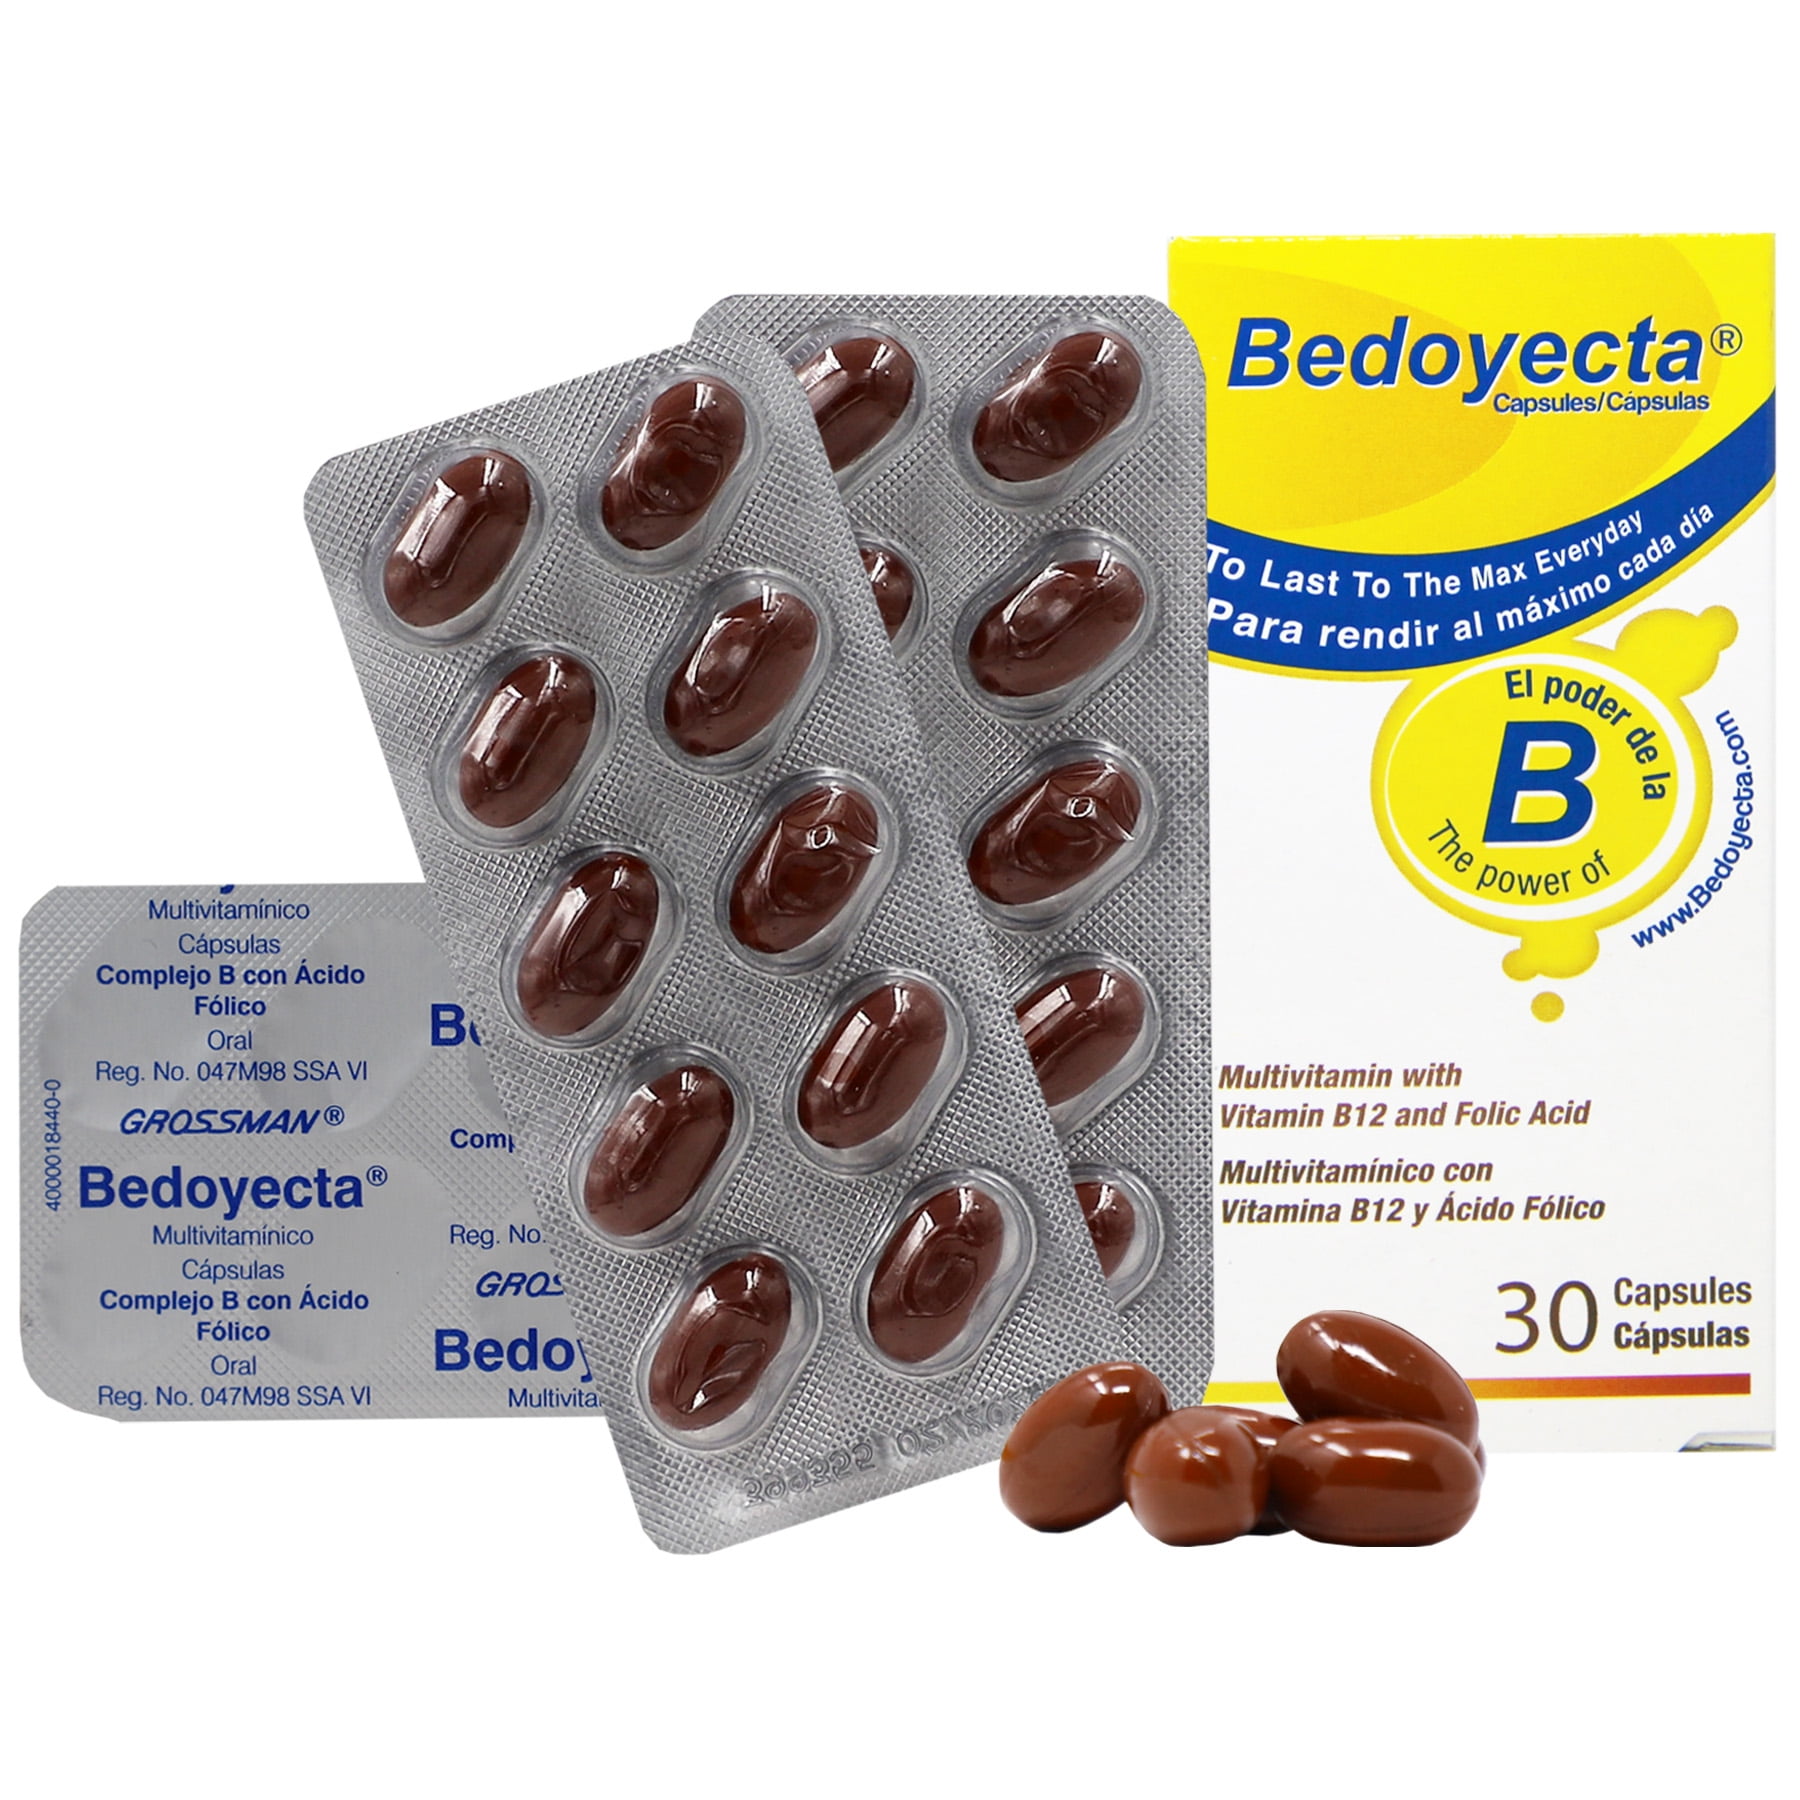 Bedoyecta Multivitamin Supplement with B12 and Folic Acid Capsules, For Adults, 30-Ct 1.5 oz